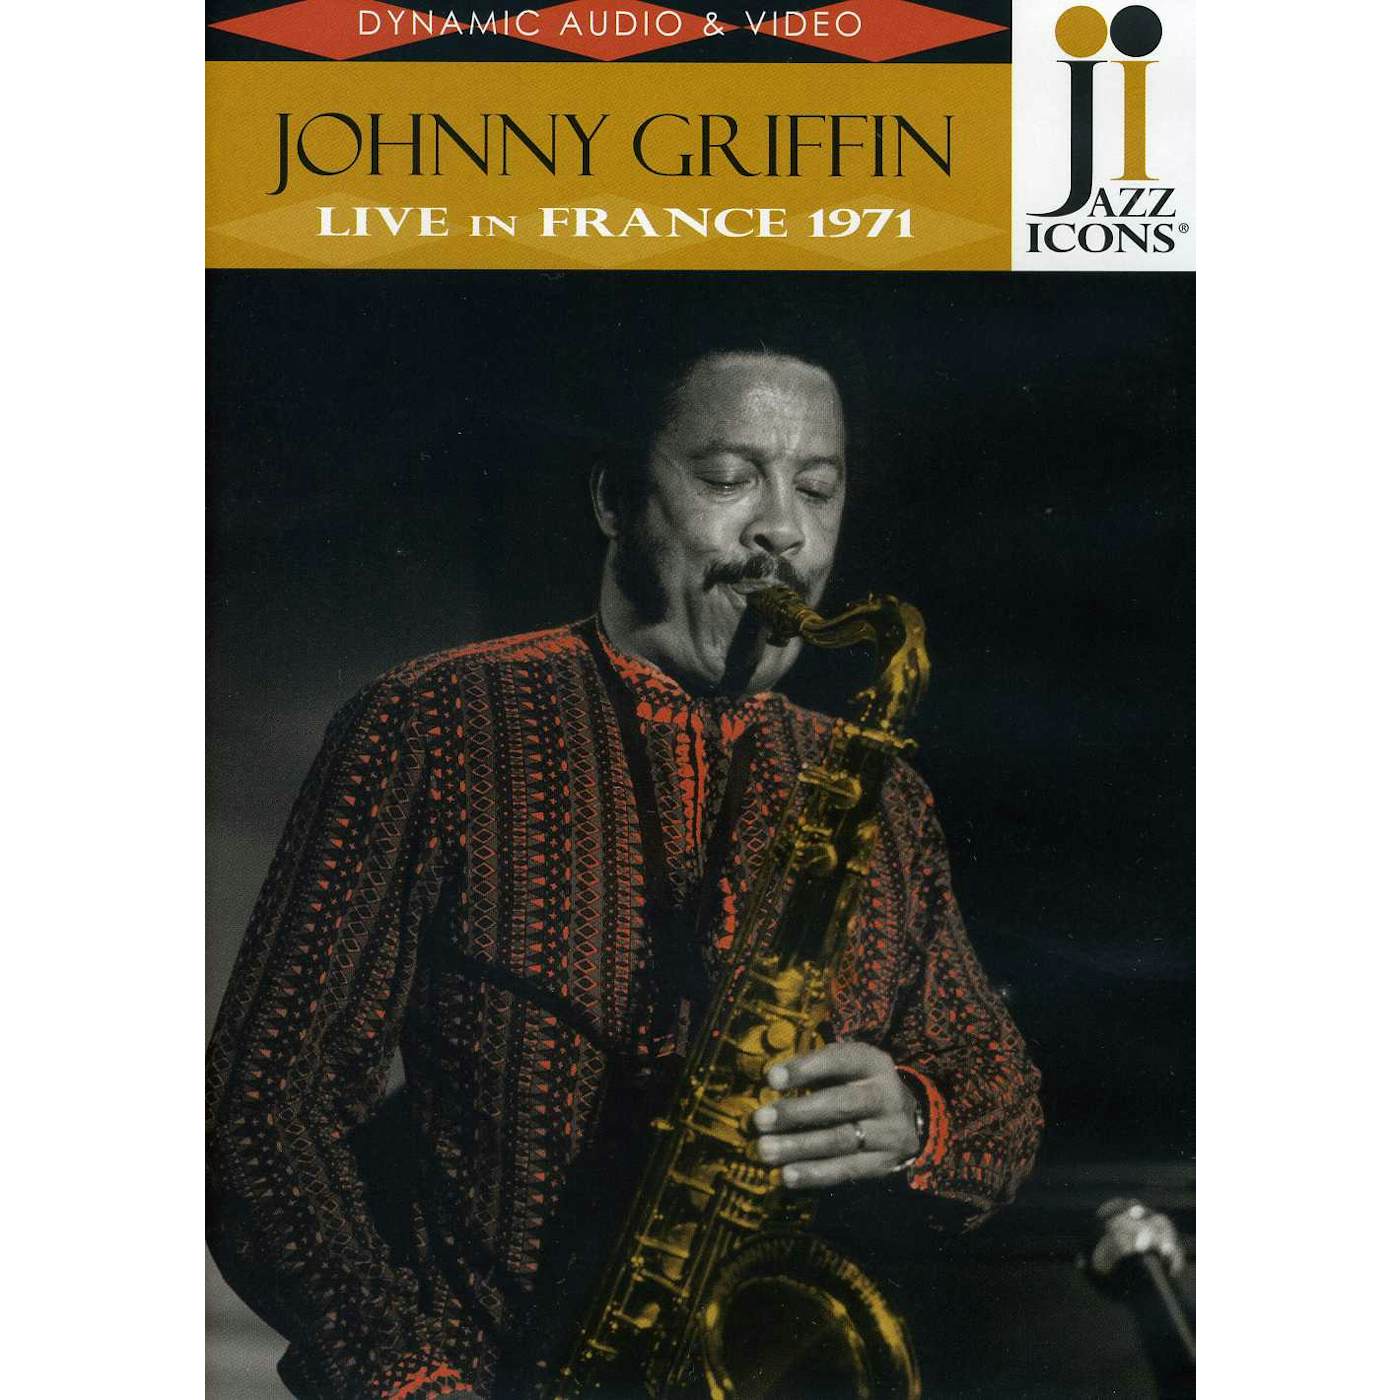 Johnny Griffin LIVE IN FRANCE 1971 DVD